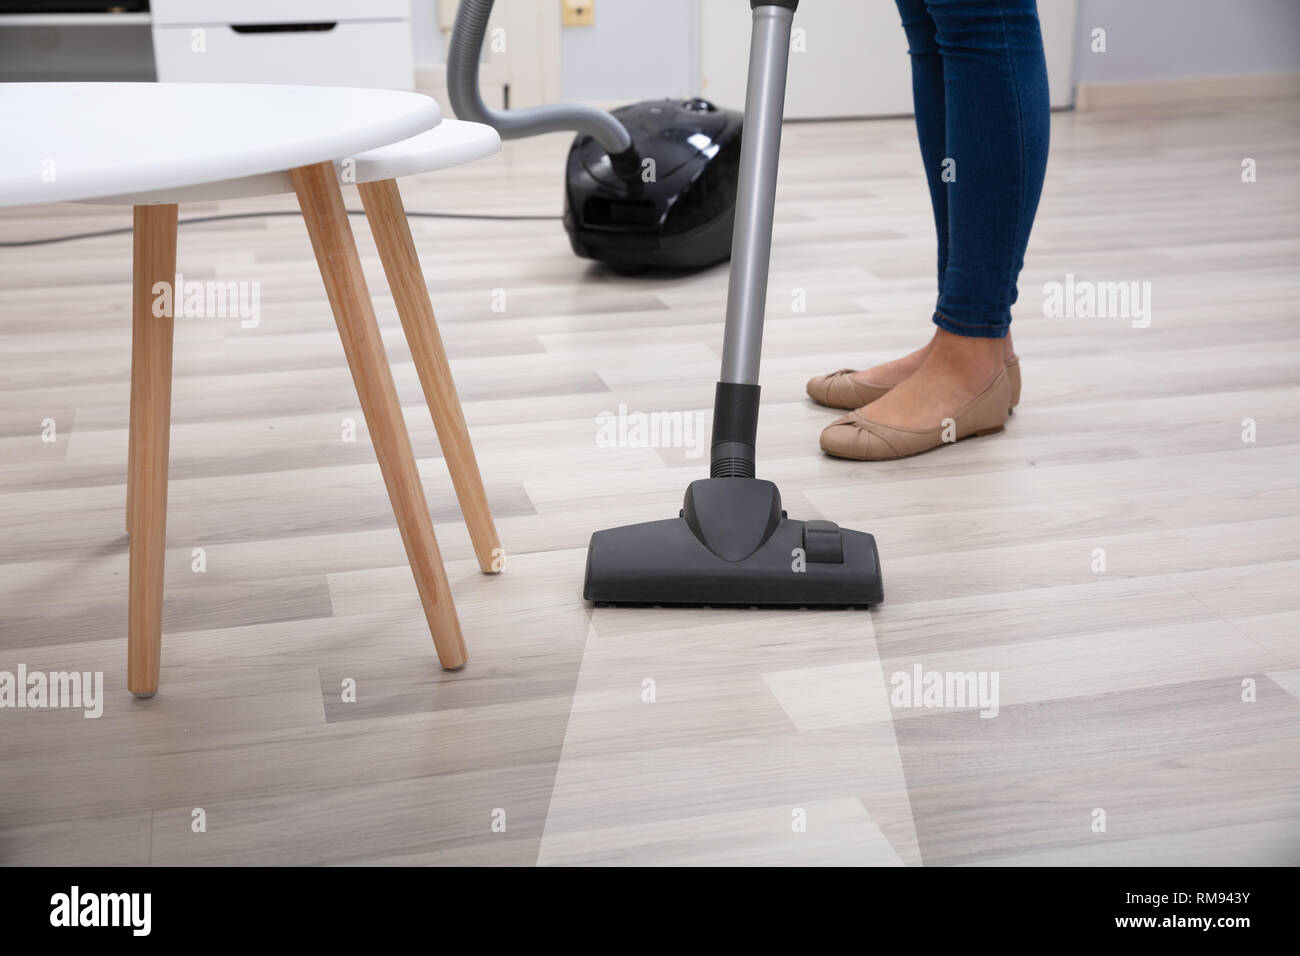 Low Section Of Person Using Vacuum Cleaner For Cleaning Hardwood